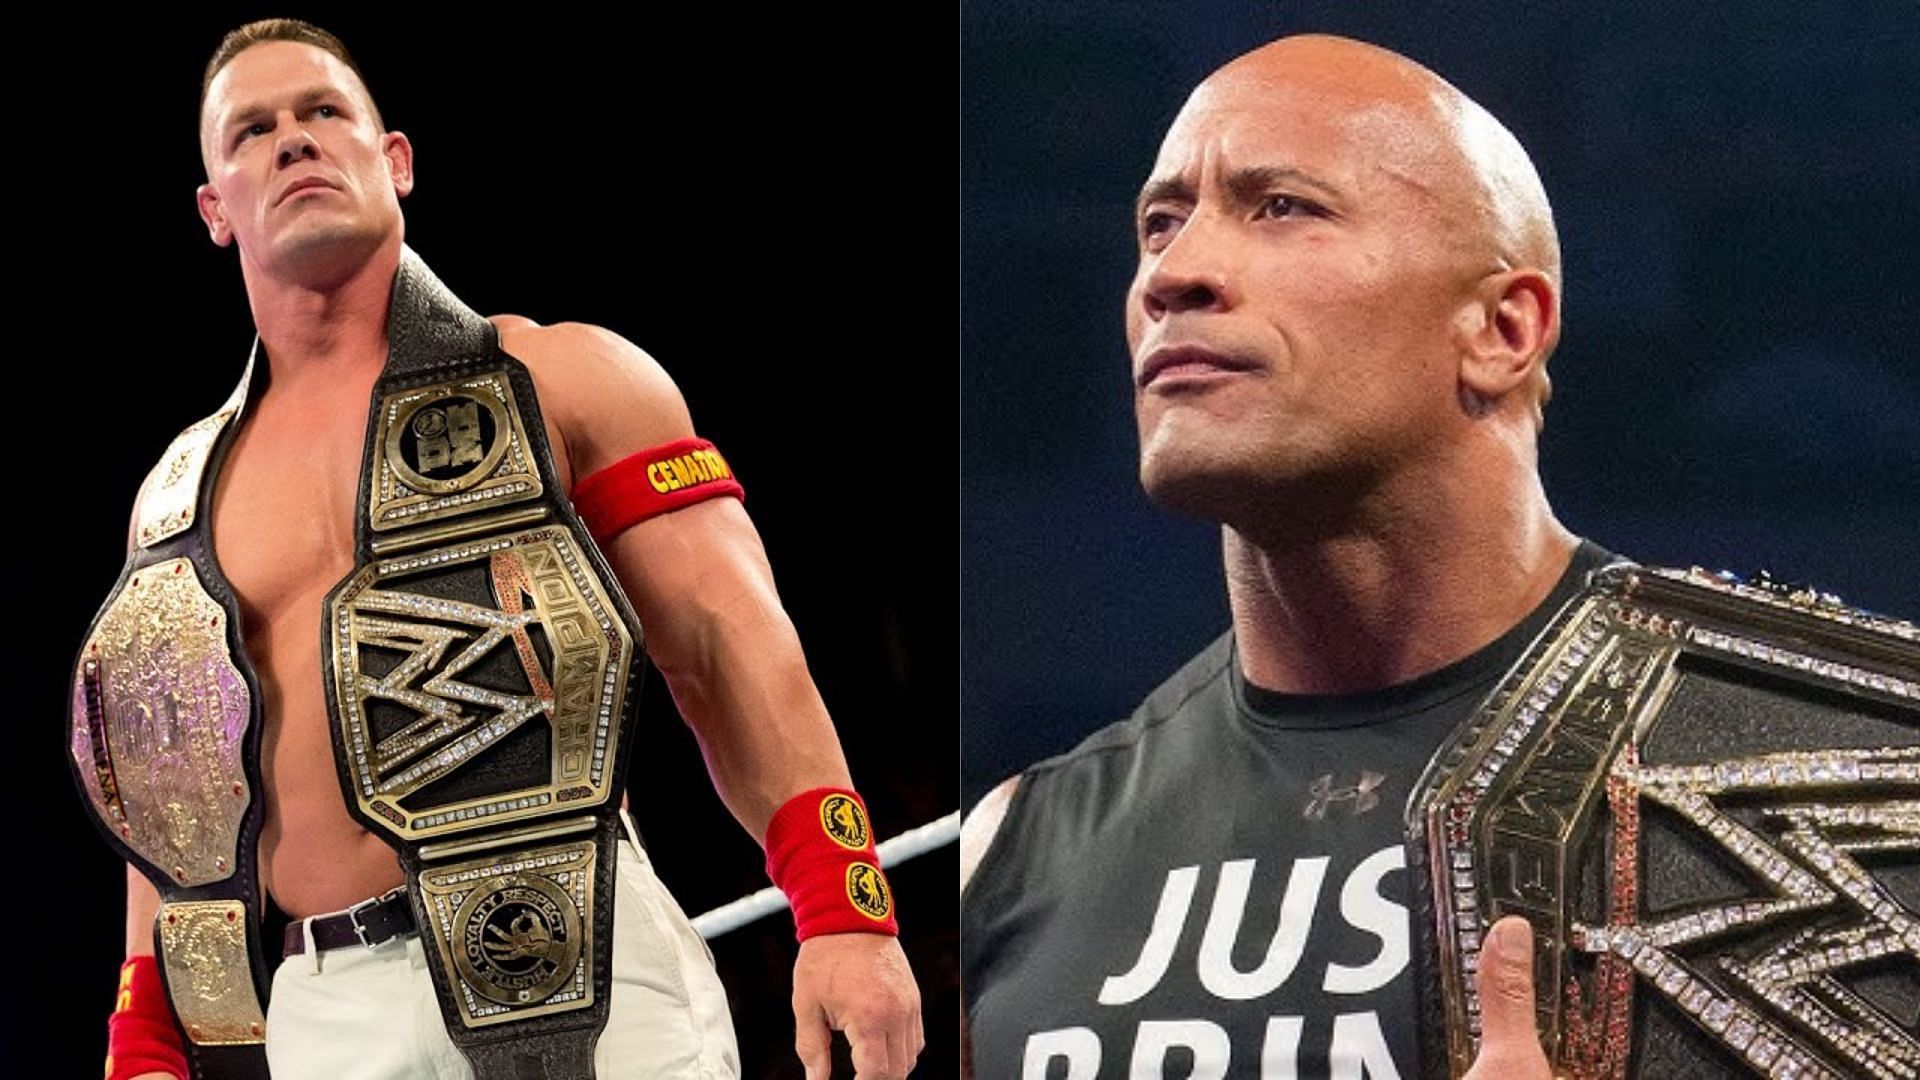 John Cena and The Rock were both seen on WWE Smackdown